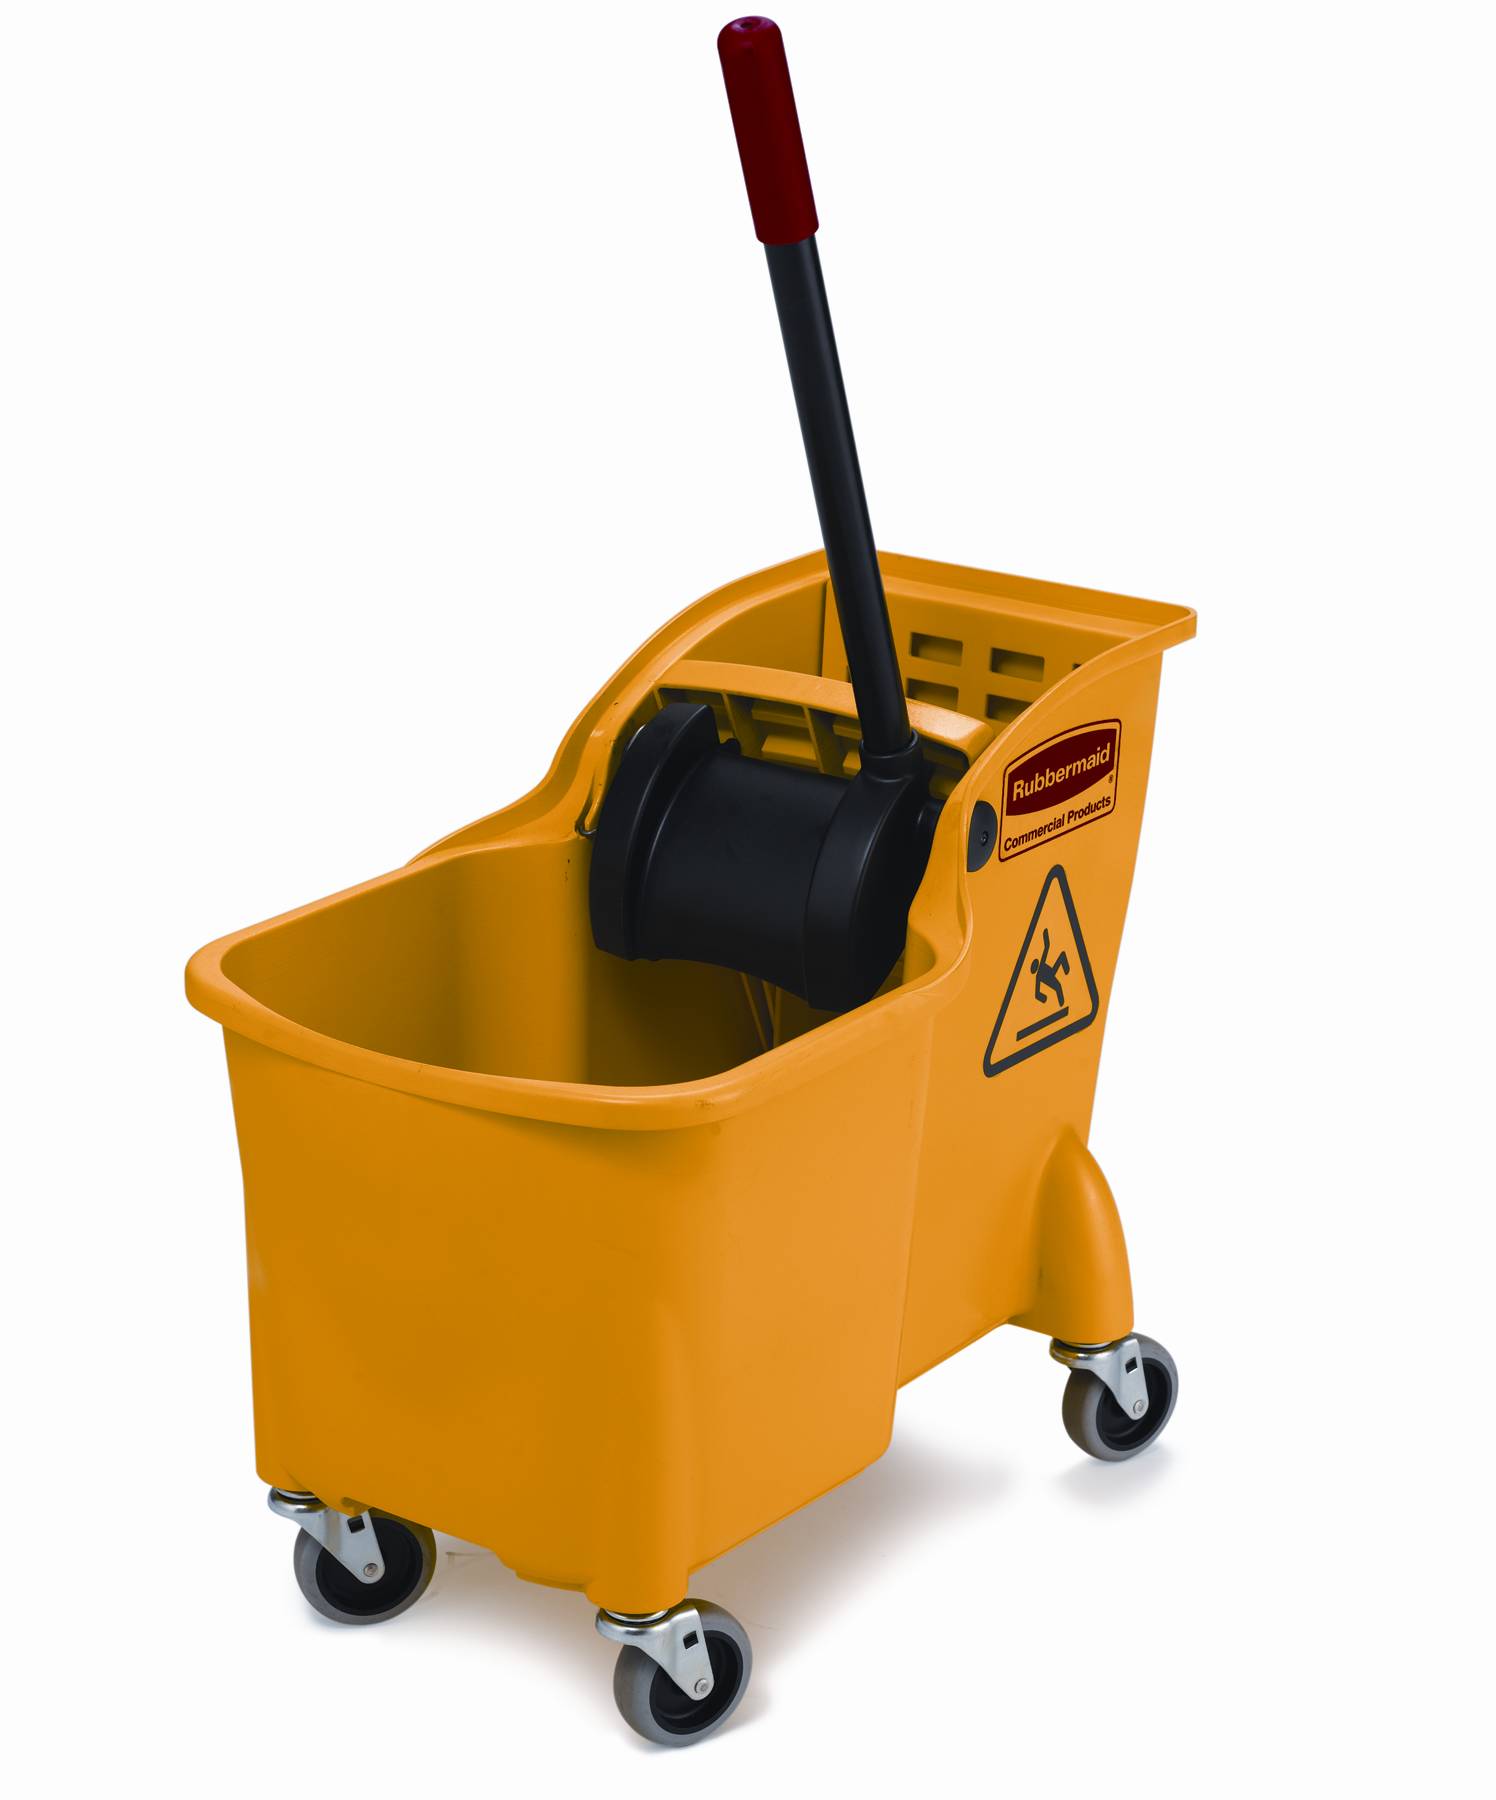 https://www.rubbermaidcommercialproducts.com/wp-images/product/detail/7380-Mop-Bucket.jpg